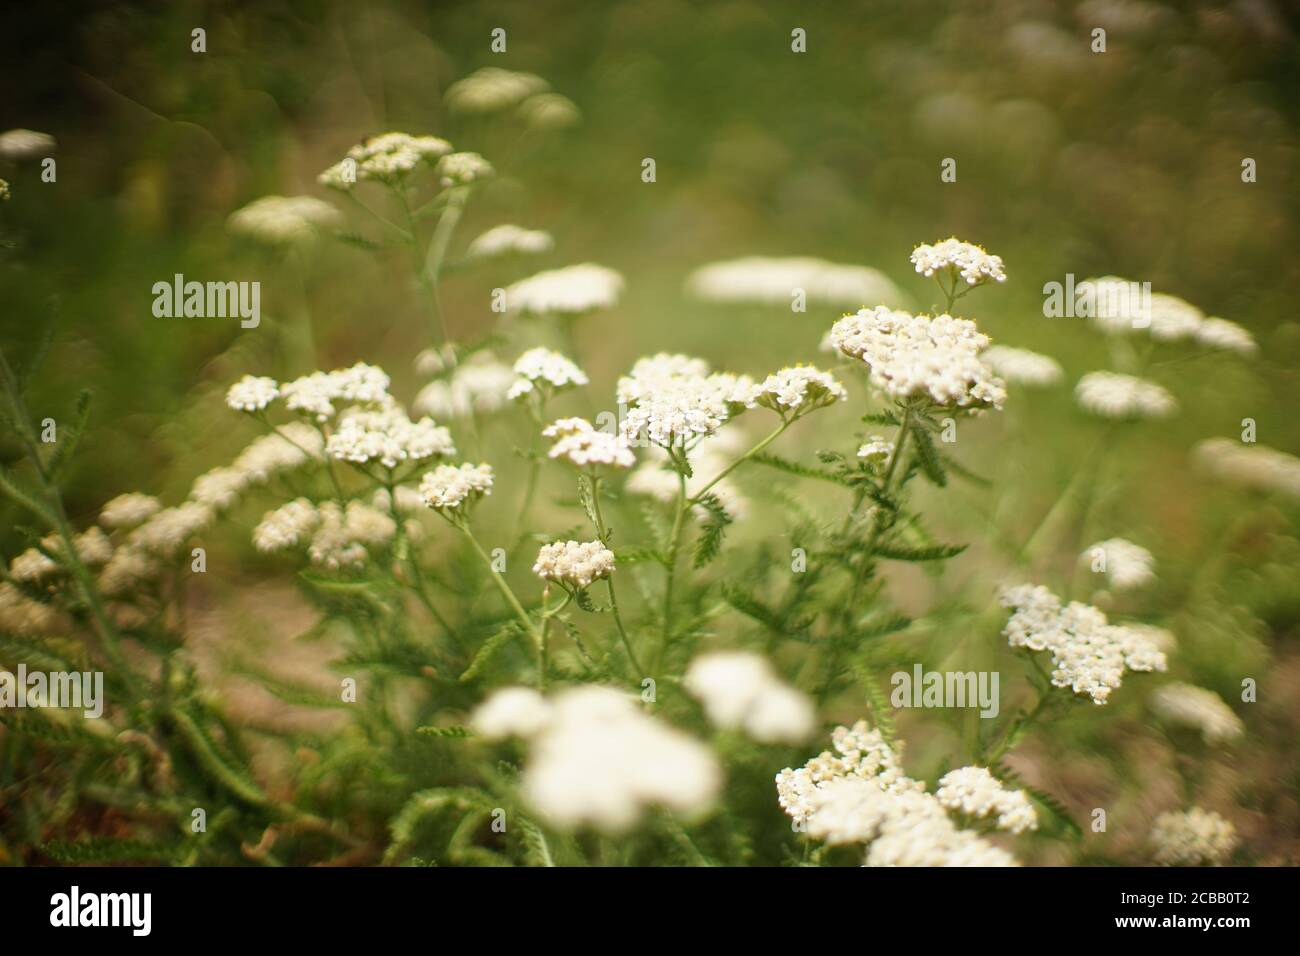 Yarrow with white flowers grow in the garden Stock Photo